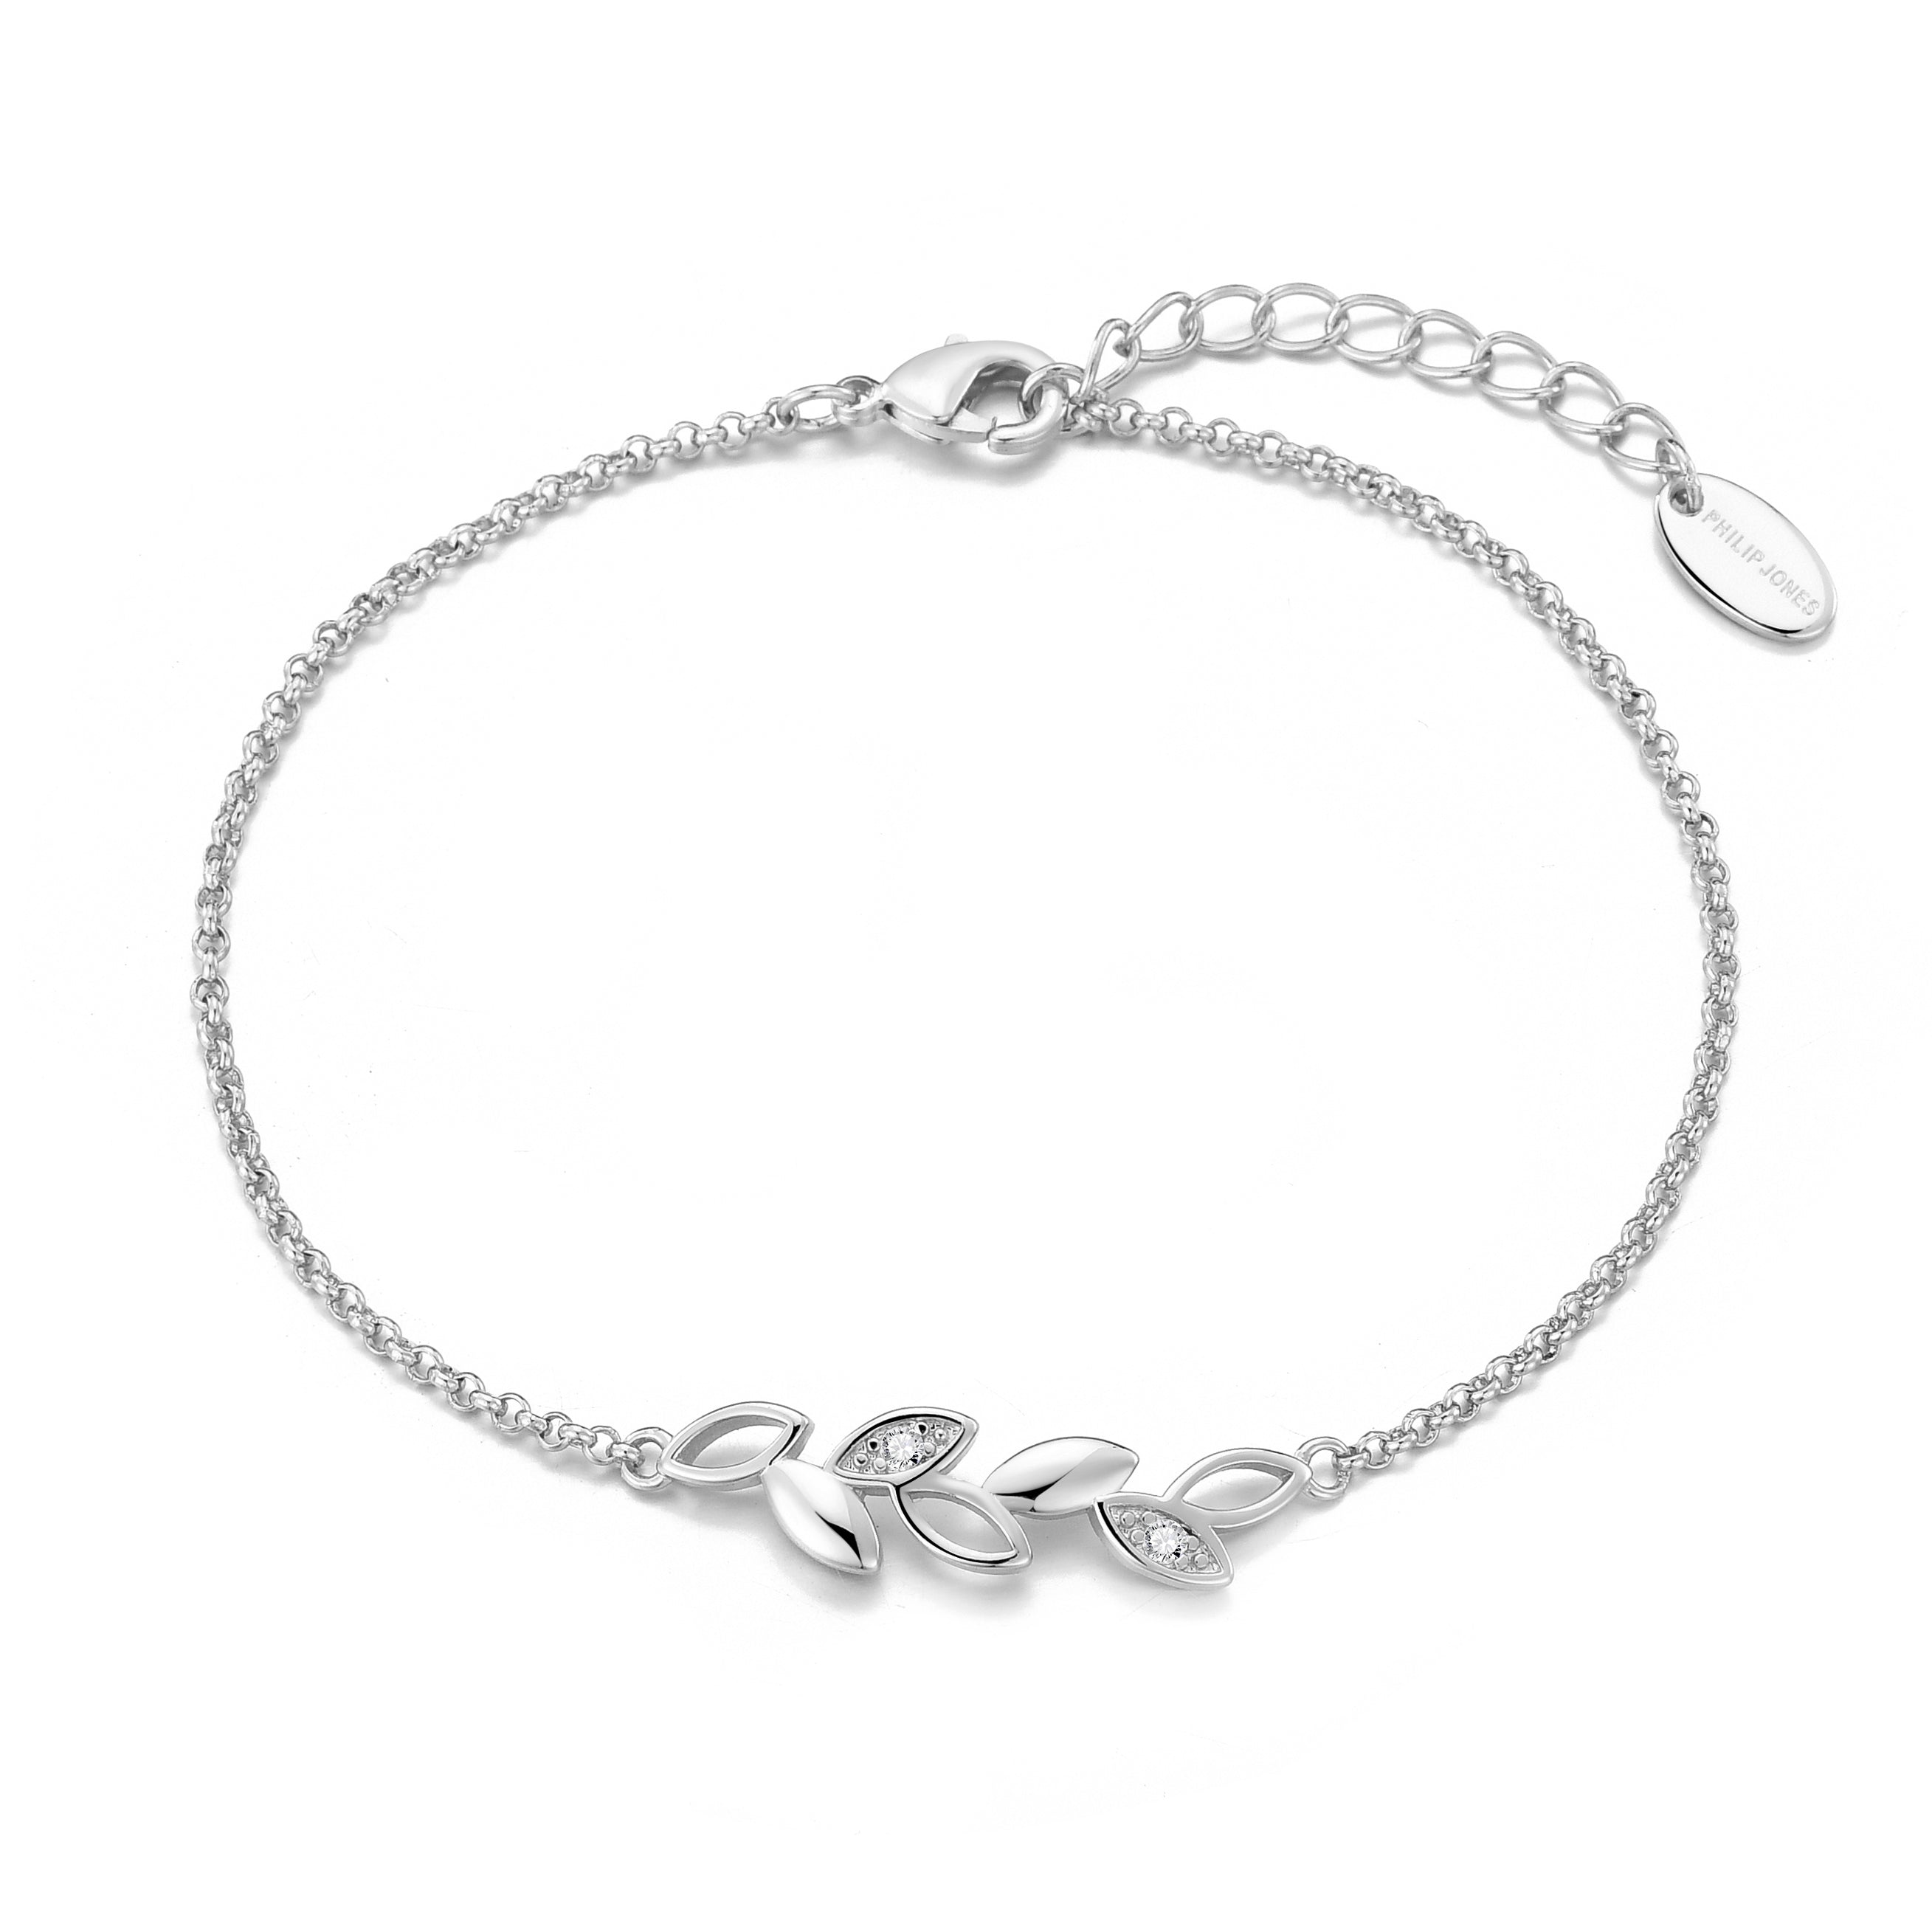 Silver Plated Leaf Chain Bracelet Created with Zircondia® Crystals by Philip Jones Jewellery